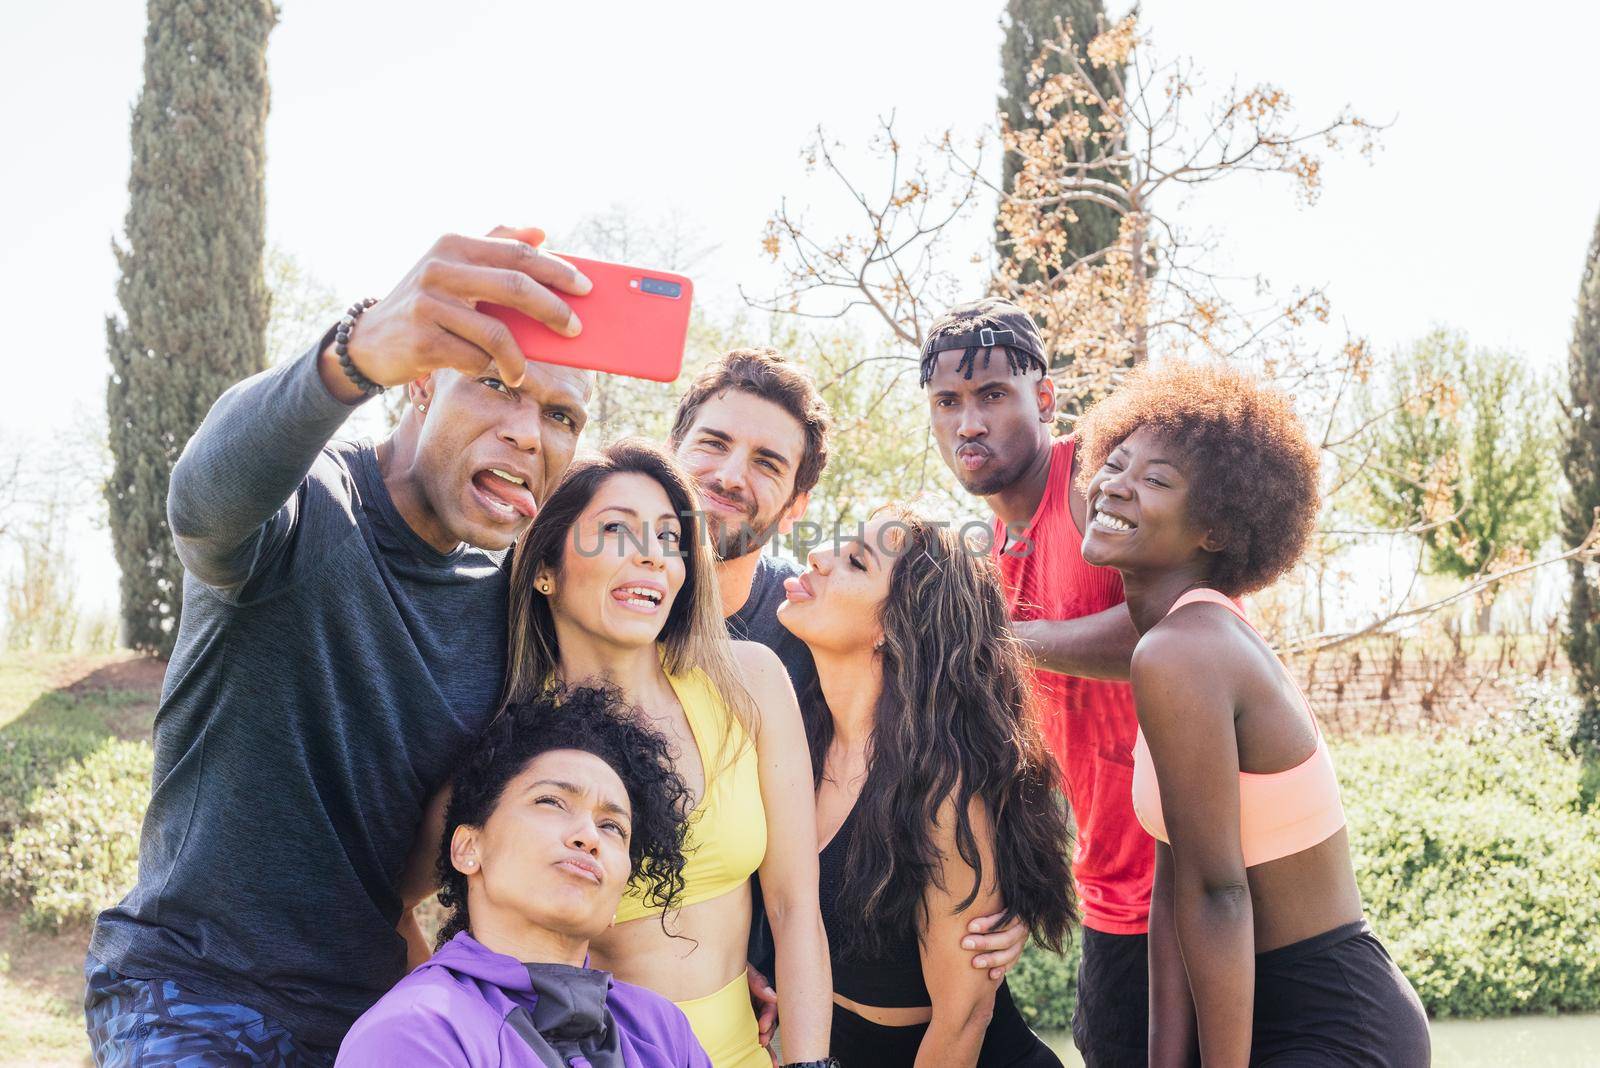 Group of runners taking a selfie in a park. Making funny faces. Horizontal framing.